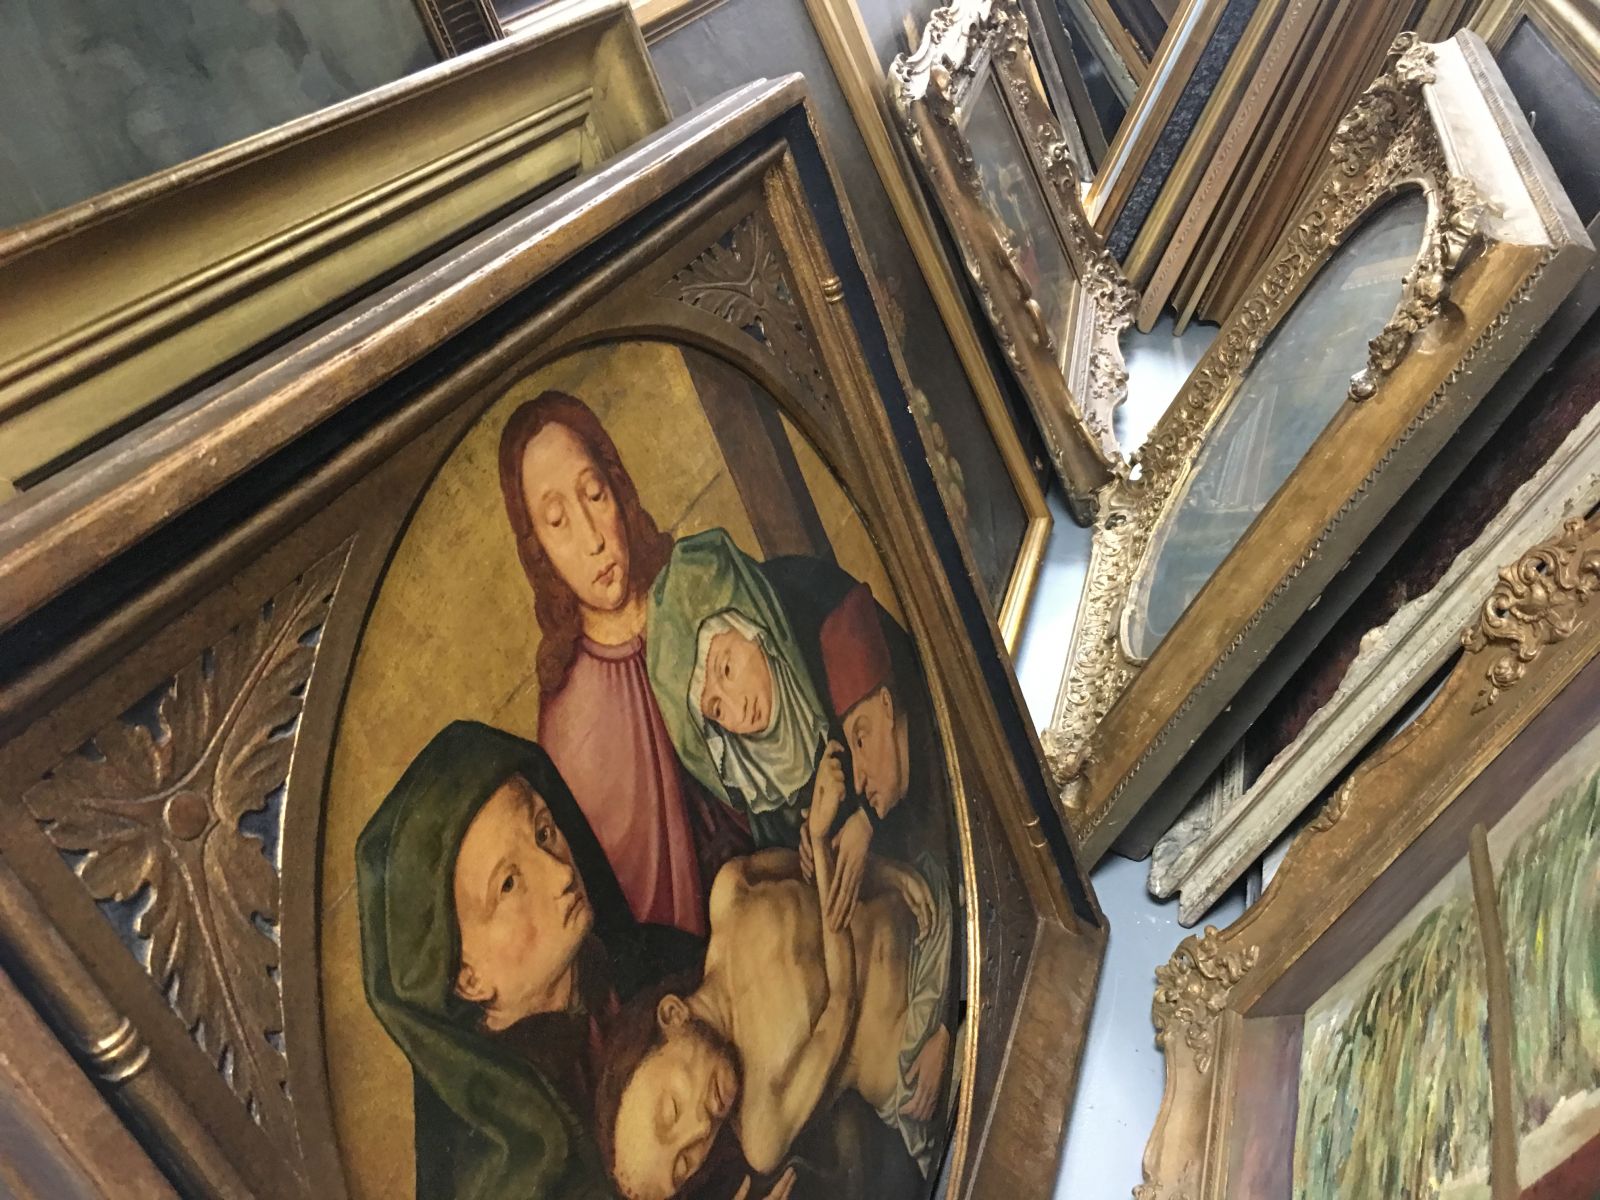 Fine works of art from old masters to more contemporary paintings stand back to back inside a storage locker.